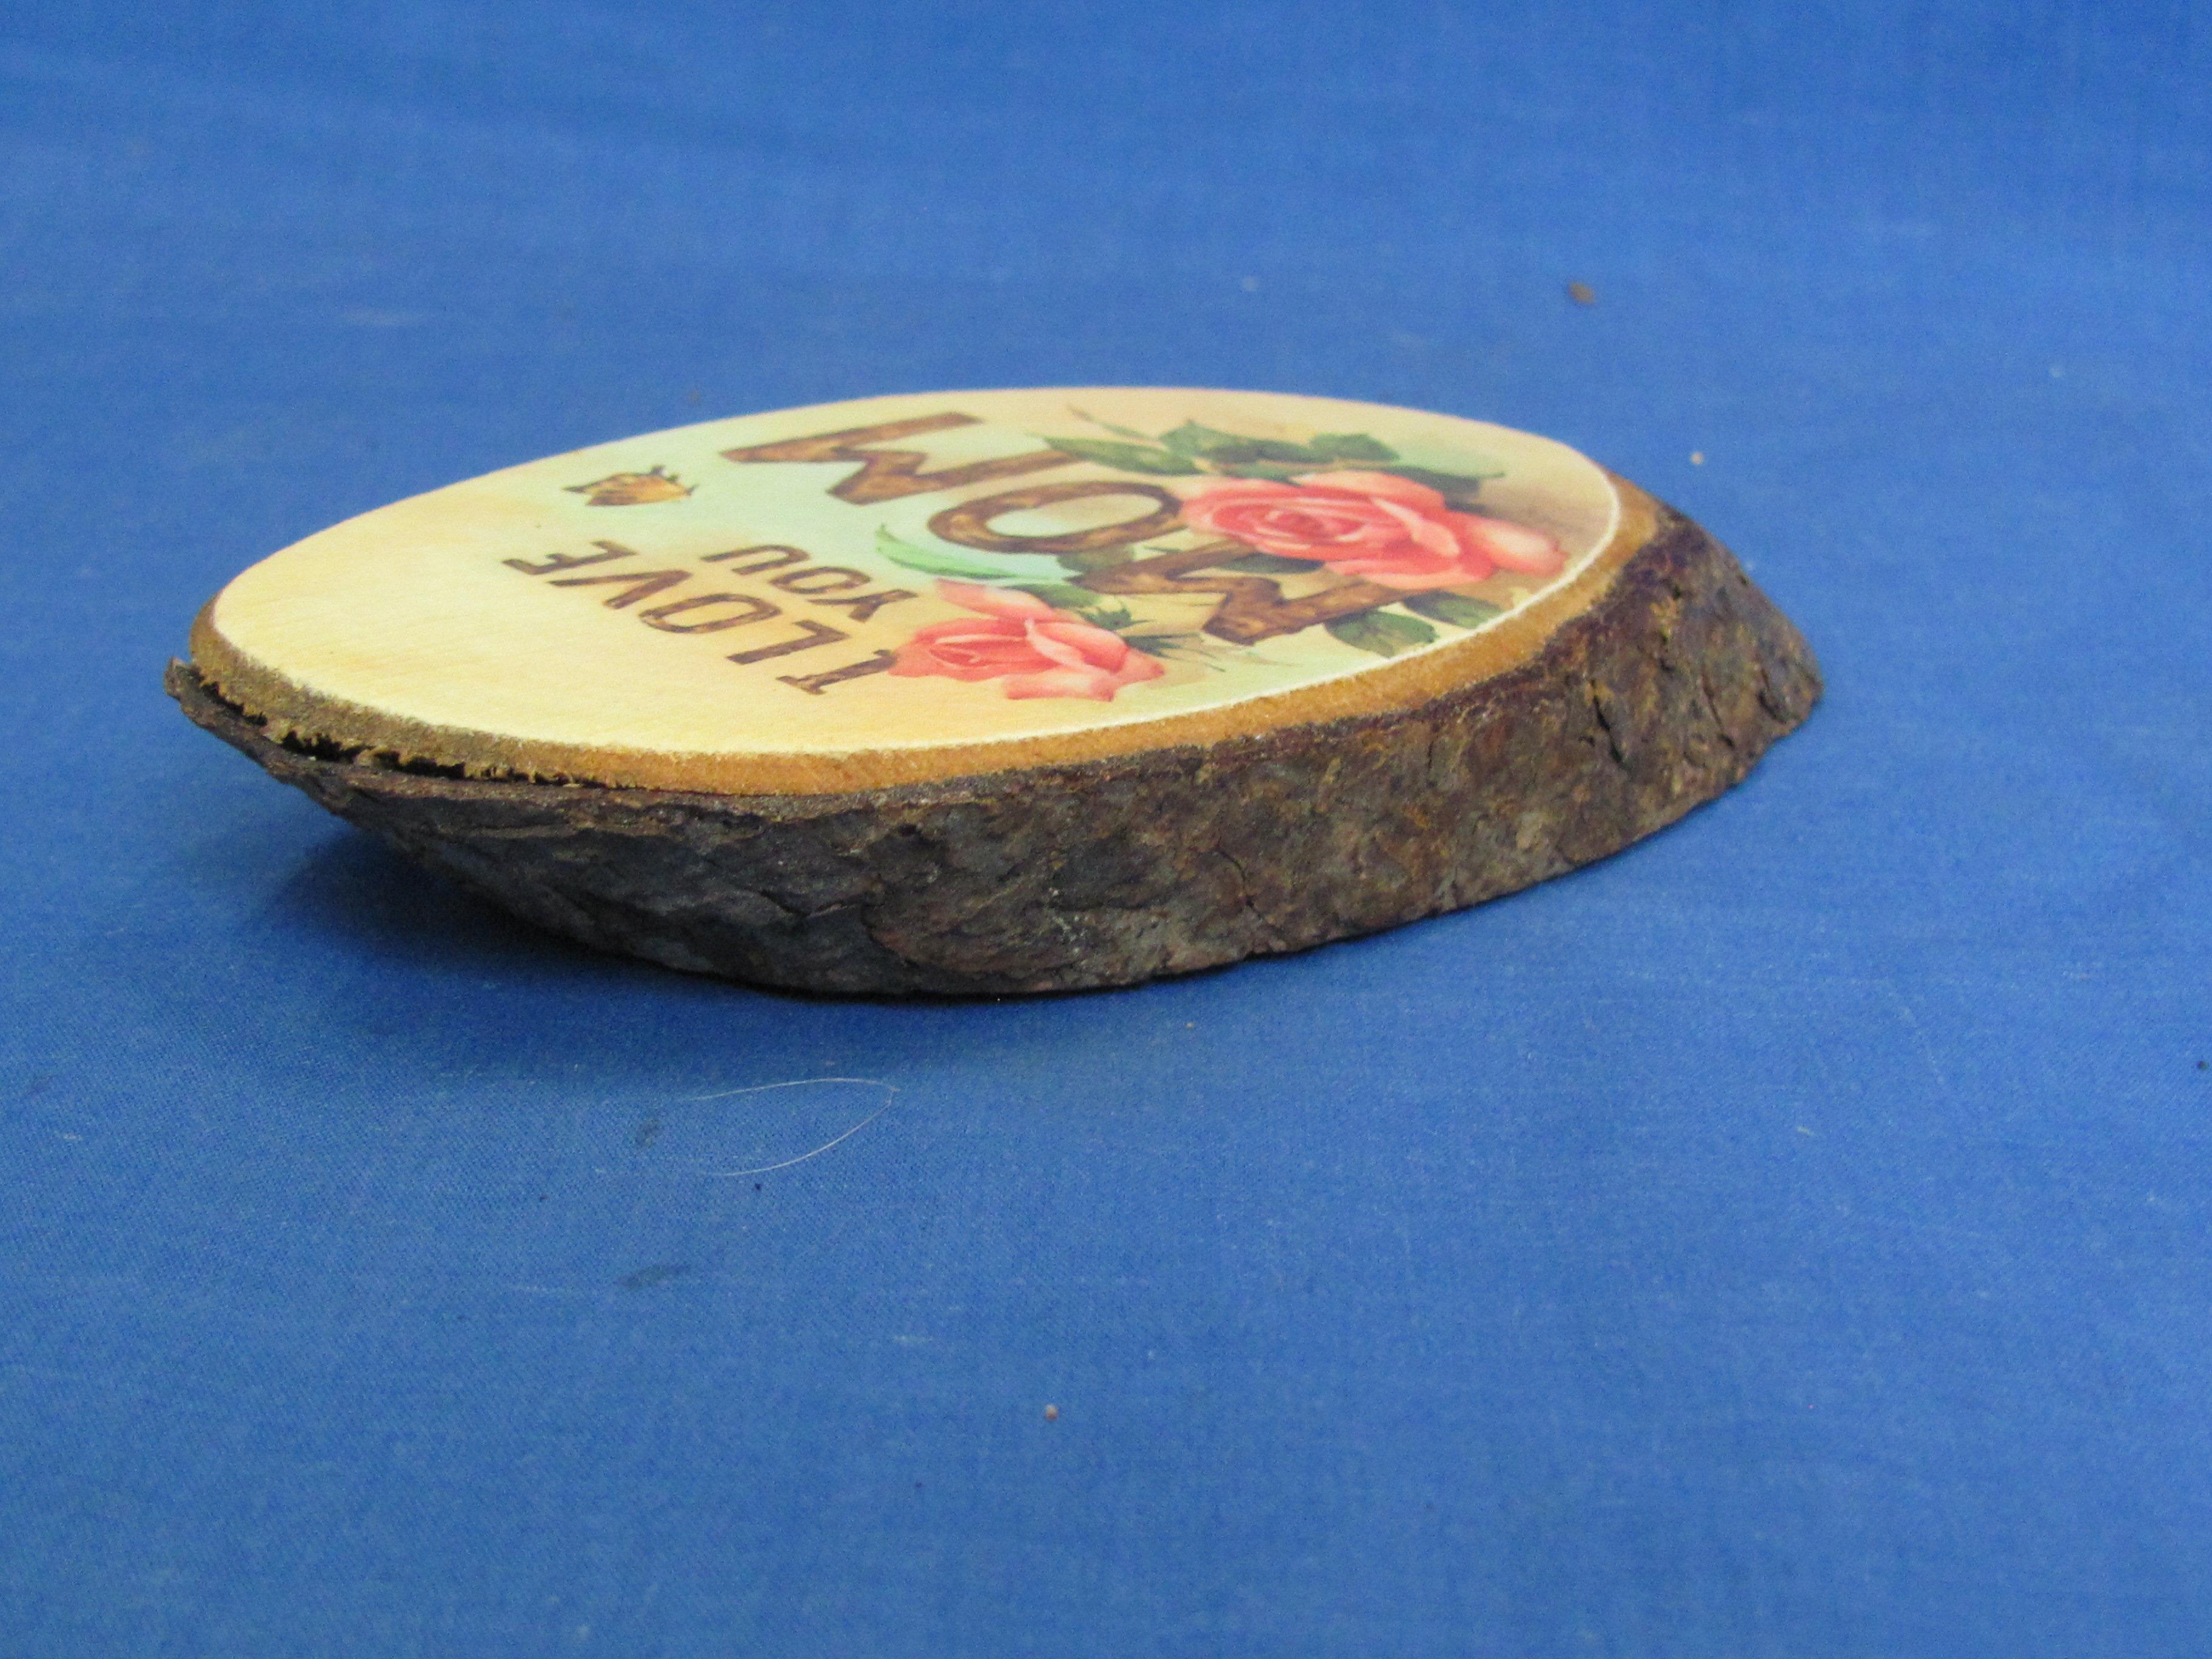 Set of 2 Real Wood Pieces with Prints – From Mackinac Island & Detroit Lakes, MN -